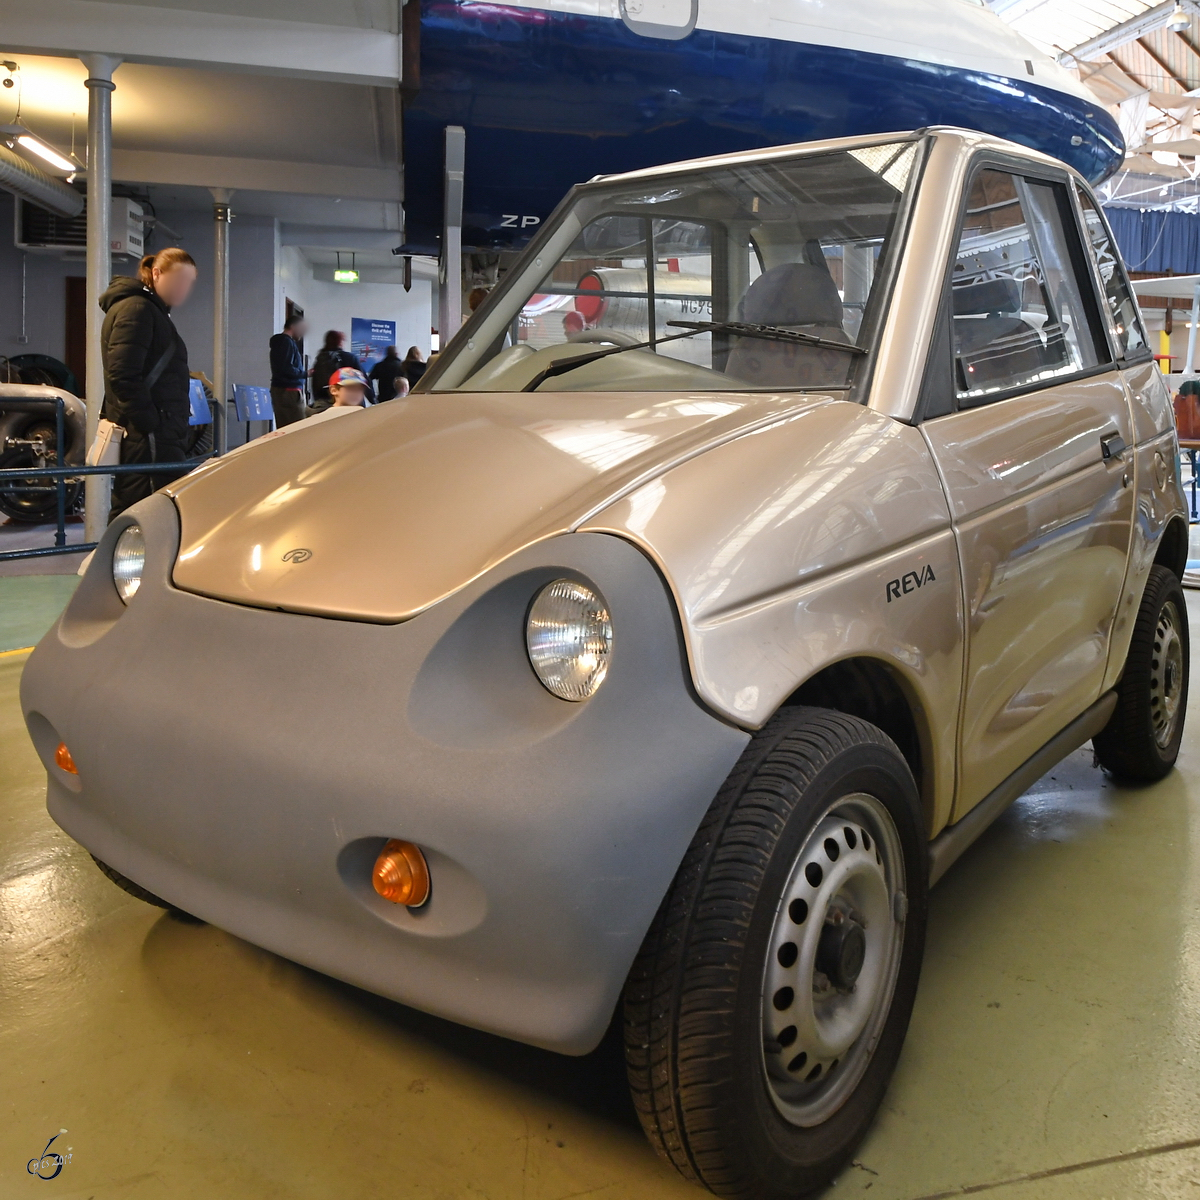 Das Elektro-Auto Reva G-Wiz Anfang Mai 2019 im Museum of Science and Industry in Manchester. 